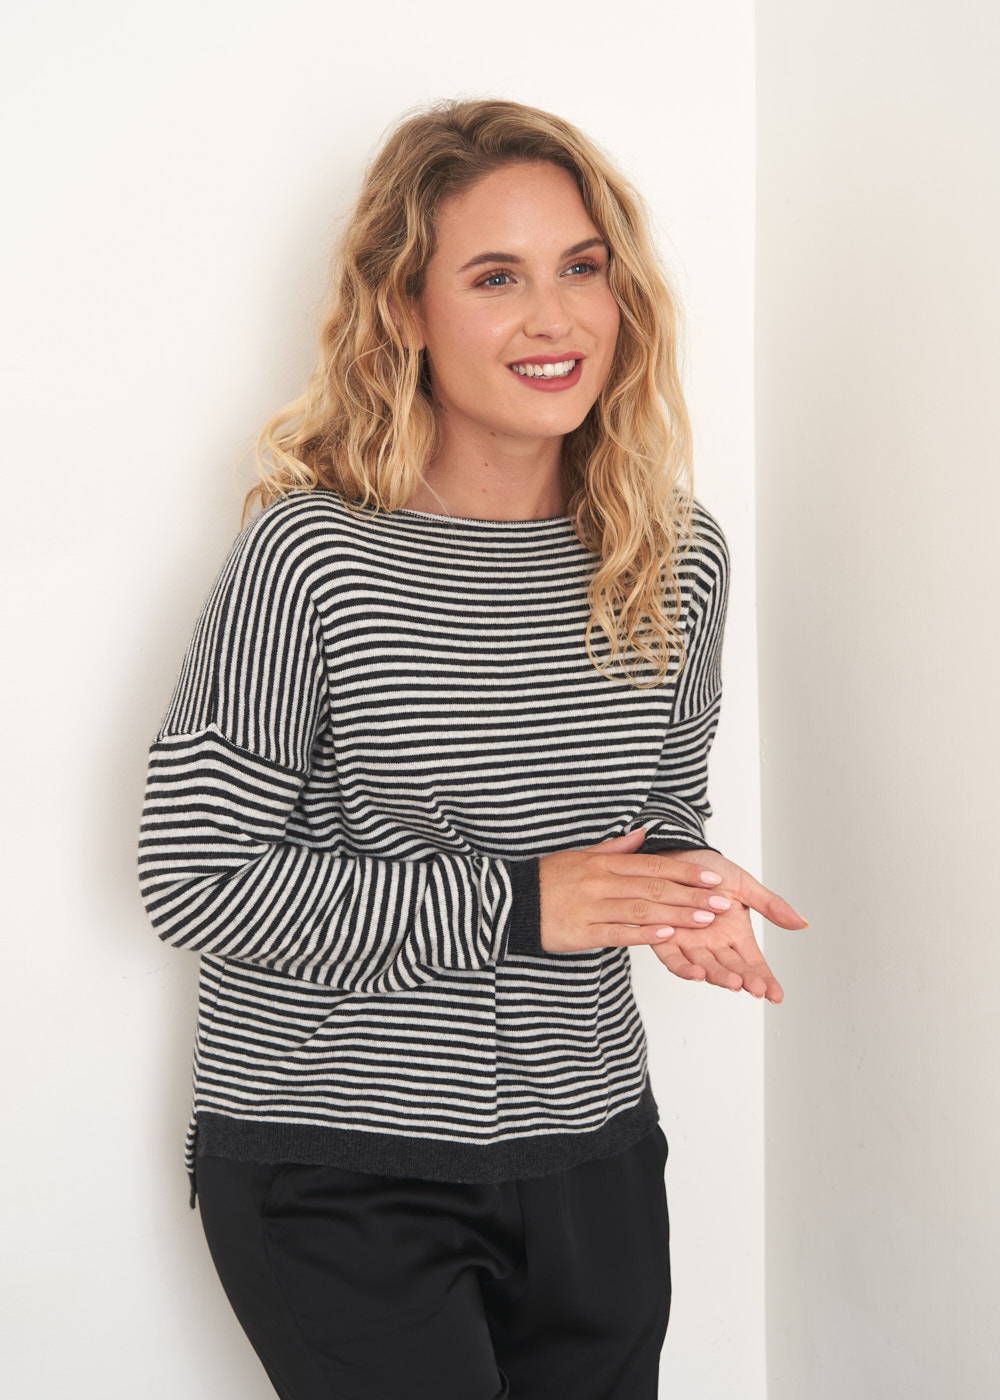 A model wearing a cashmere blend dark grey and off white striped jumper